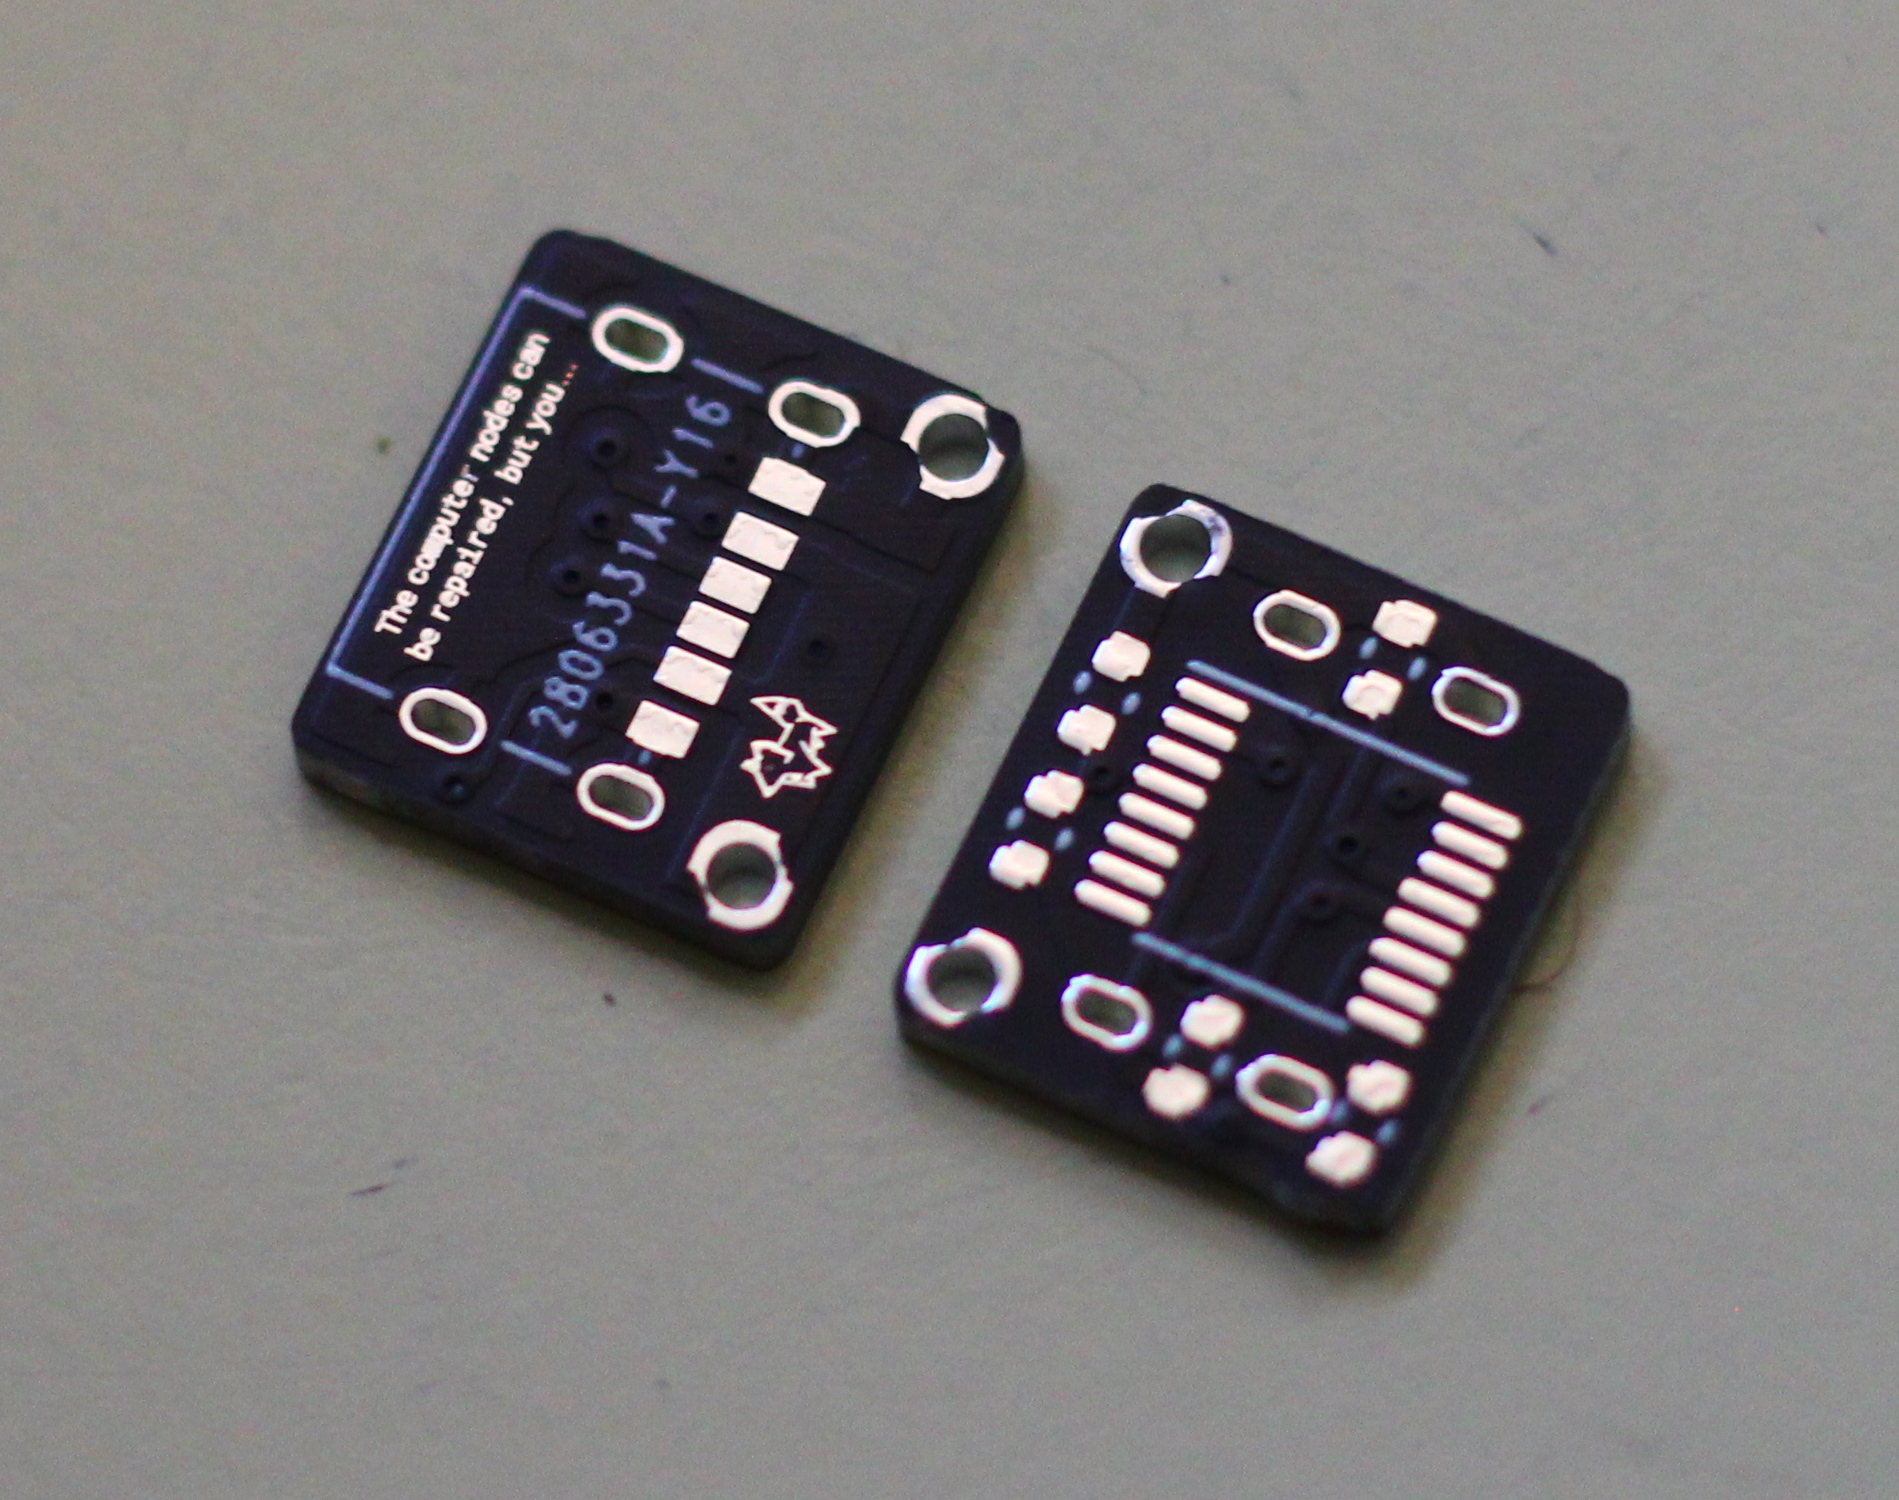 Two tiny rectangular PCB's, one side 